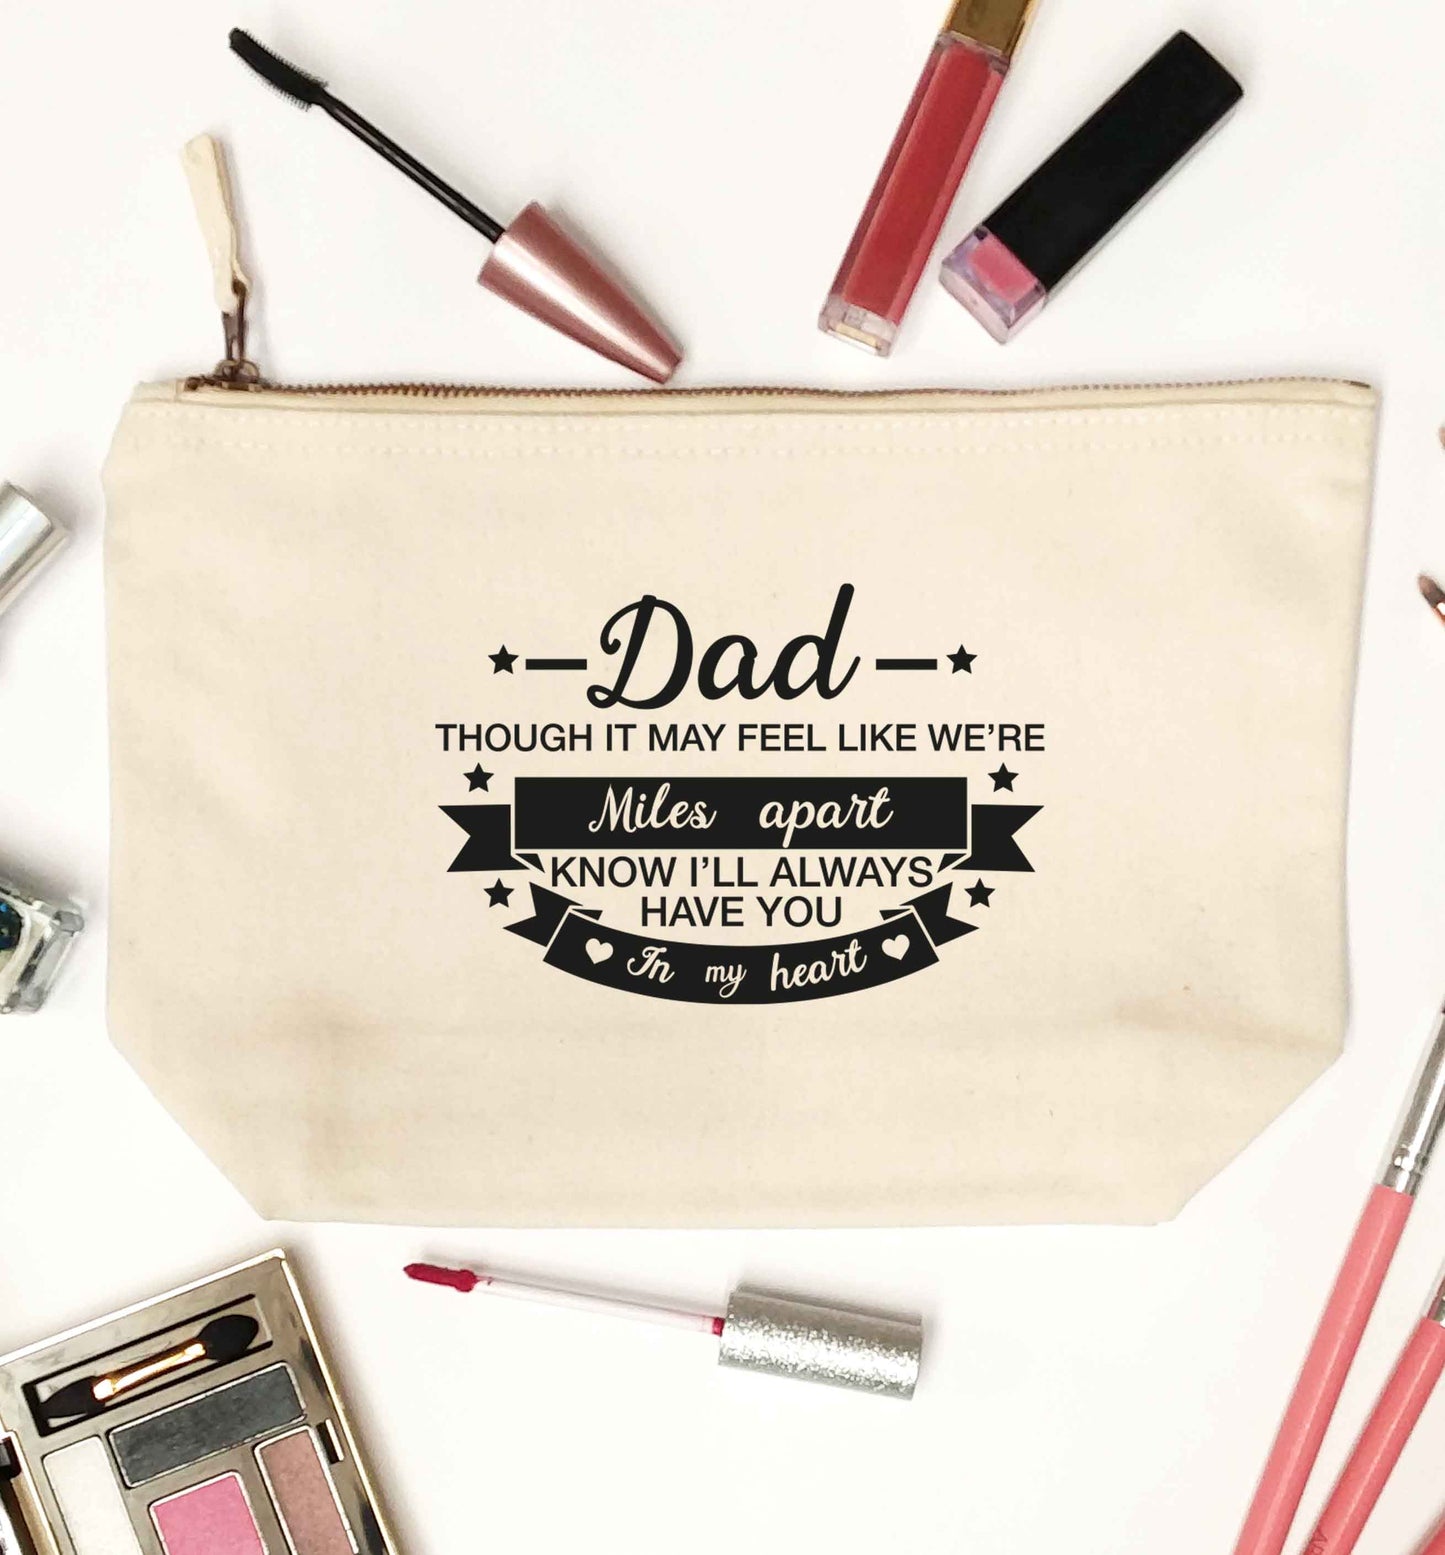 Dad though it may feel like we're miles apart know I'll always have you in my heart natural makeup bag